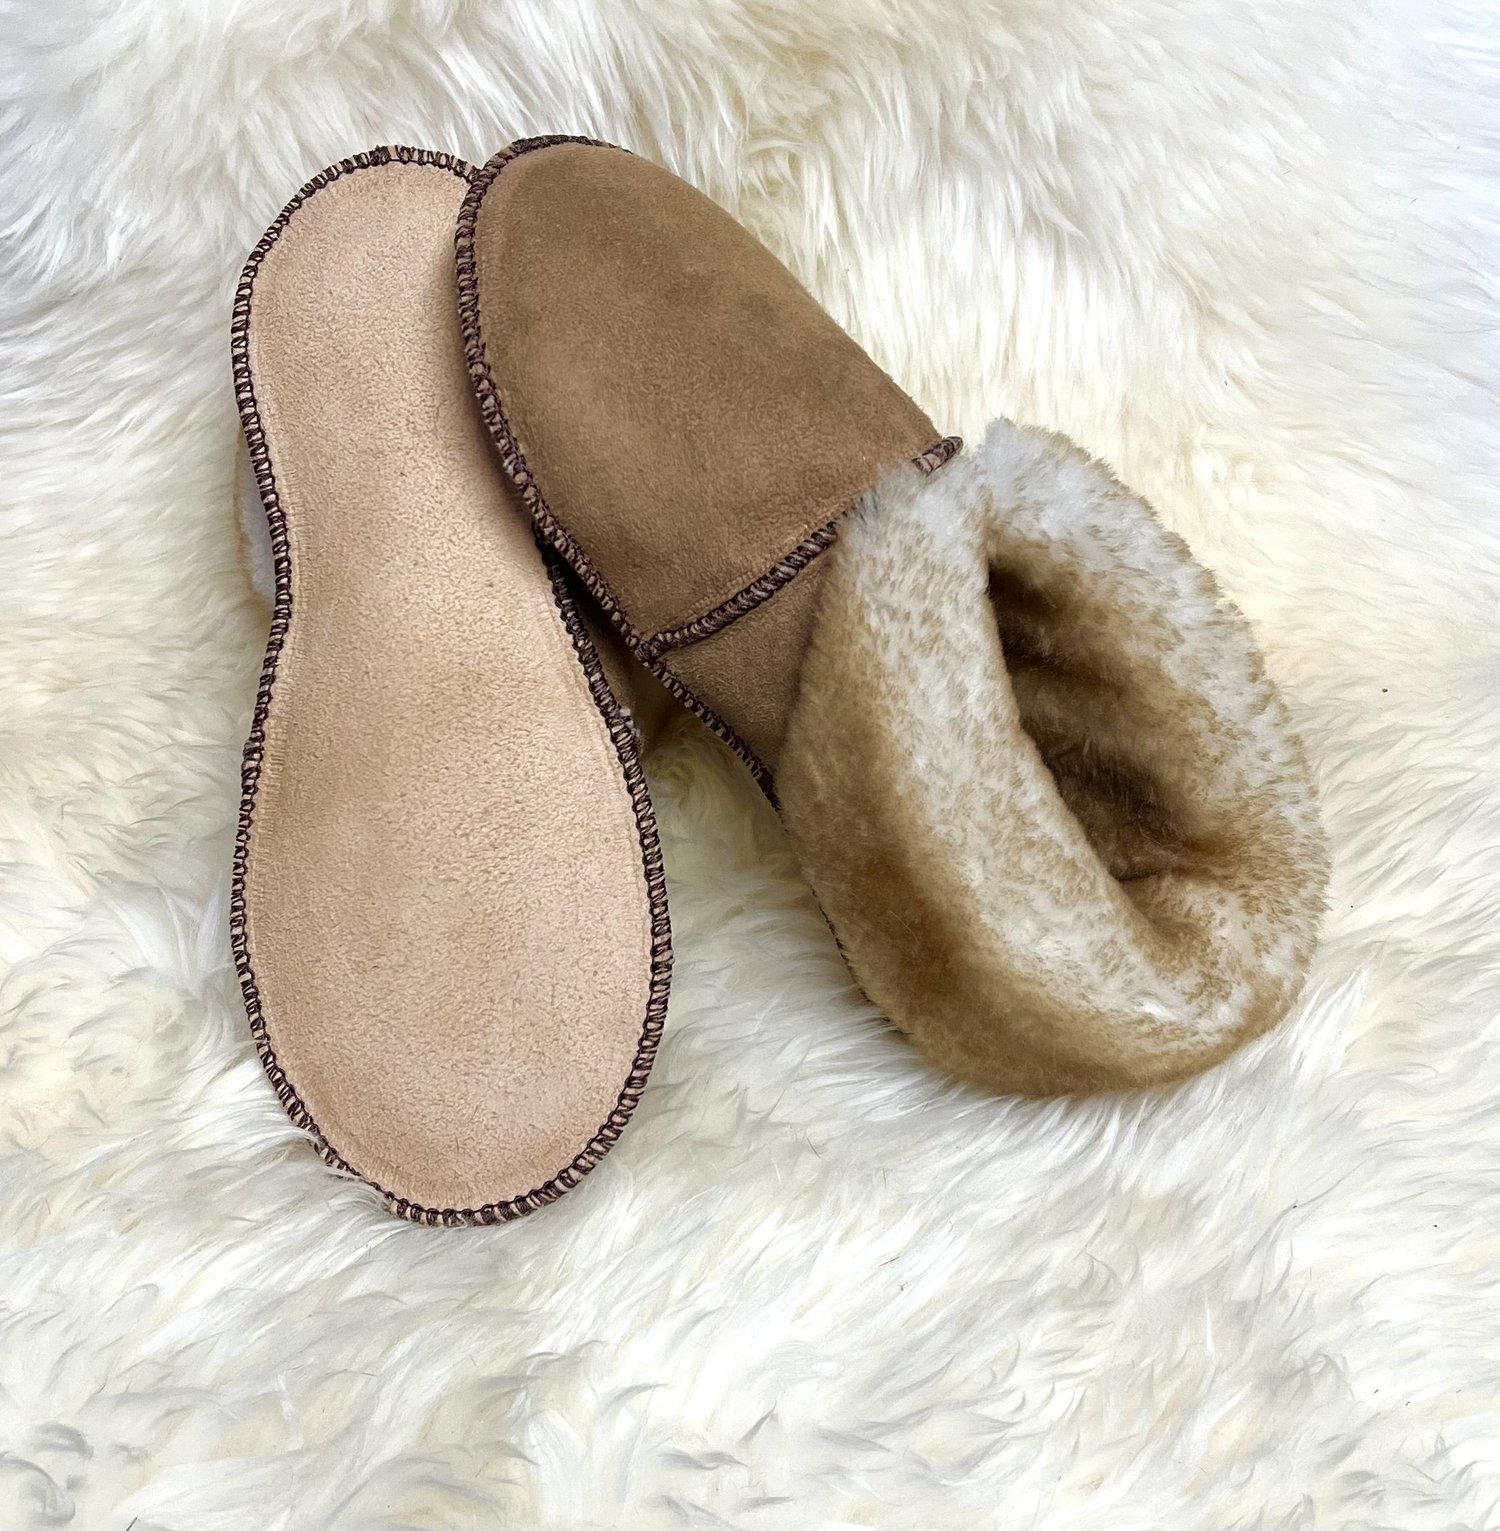 Hard Sole Sheepskin Slippers - PRODUCT OUT OF STOCK BUT AVAILABLE FOR ORDER  AND WILL SHIP ASAP — High Plains Sheepskin